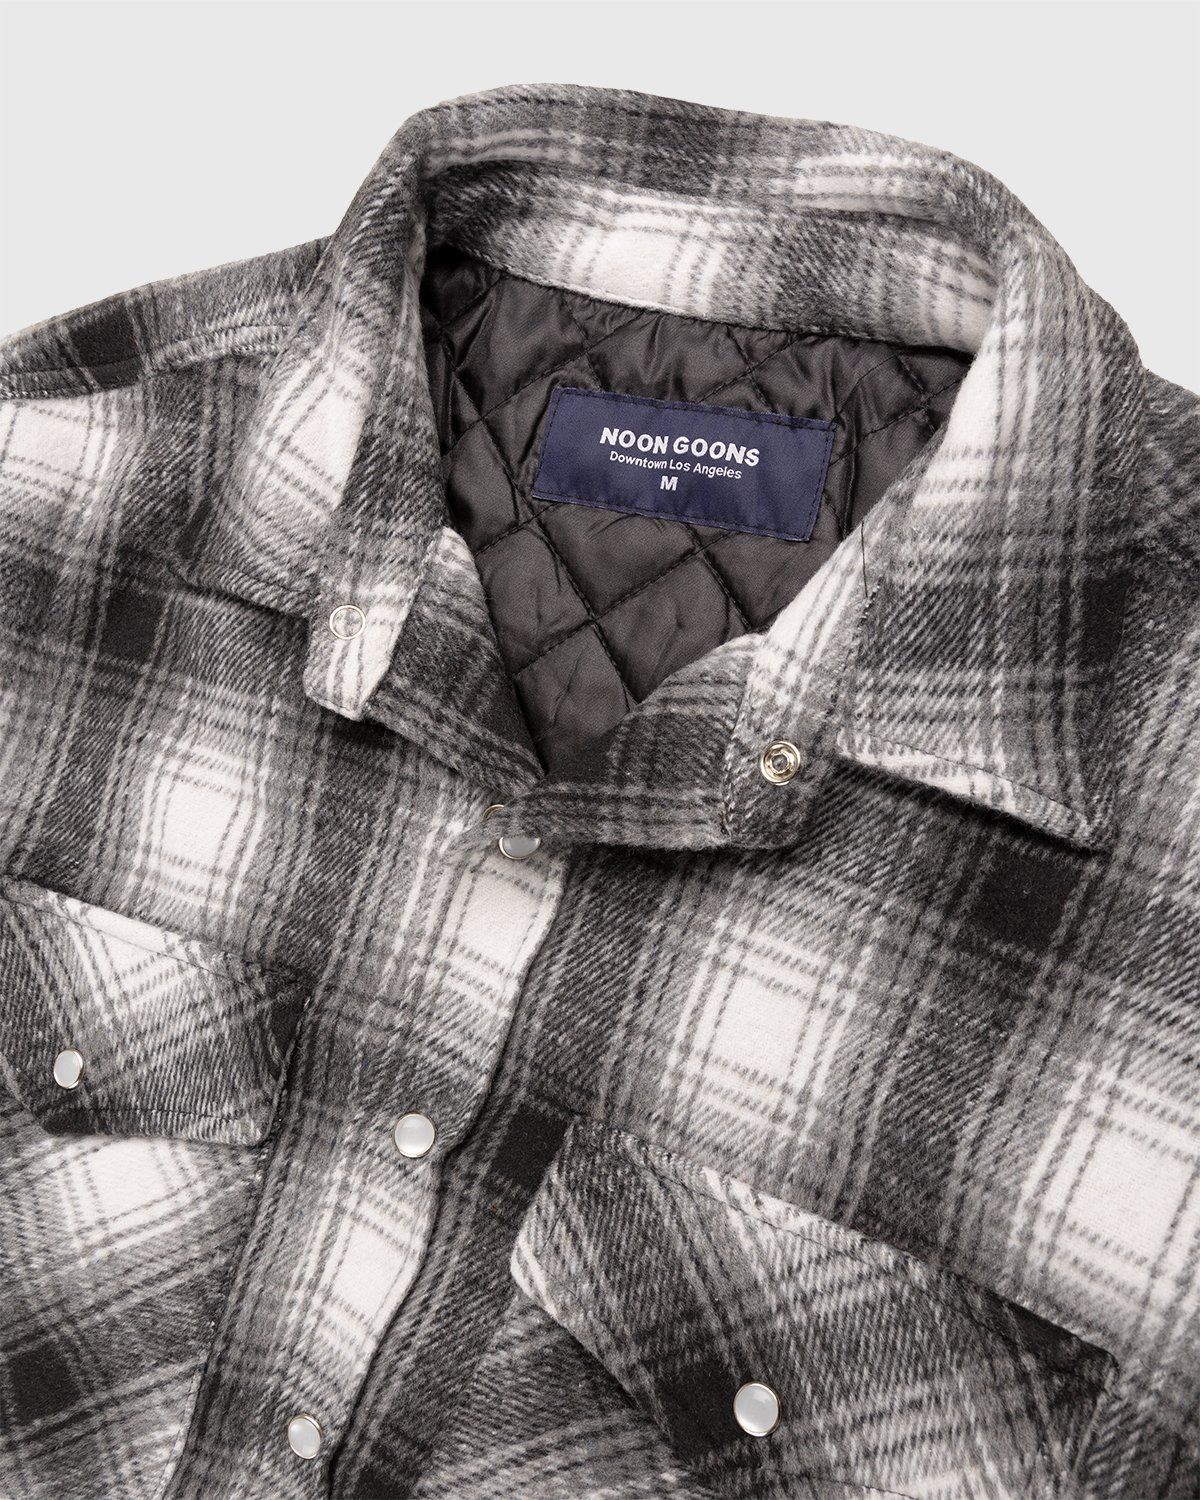 Noon Goons – Tahoe Quilted Flannel Grey - Outerwear - Grey - Image 3